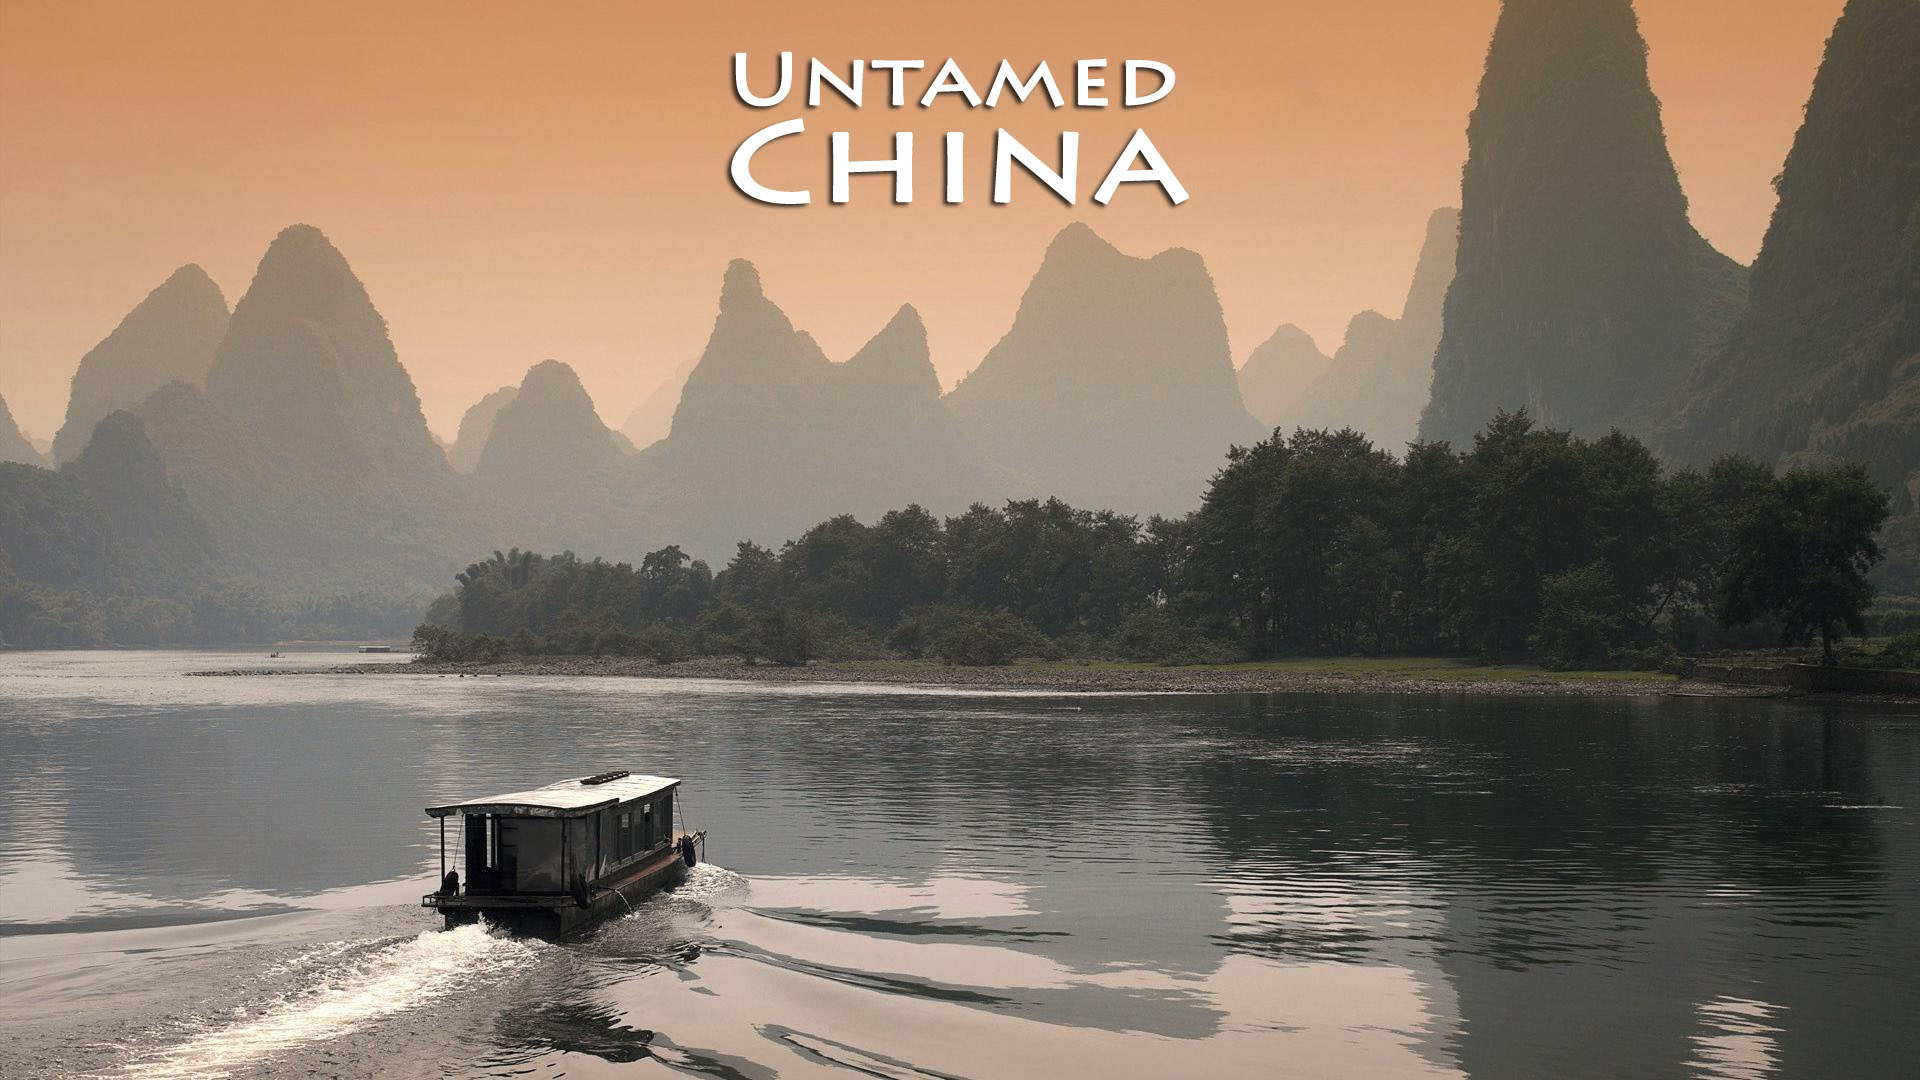 Show Untamed China with Nigel Marven